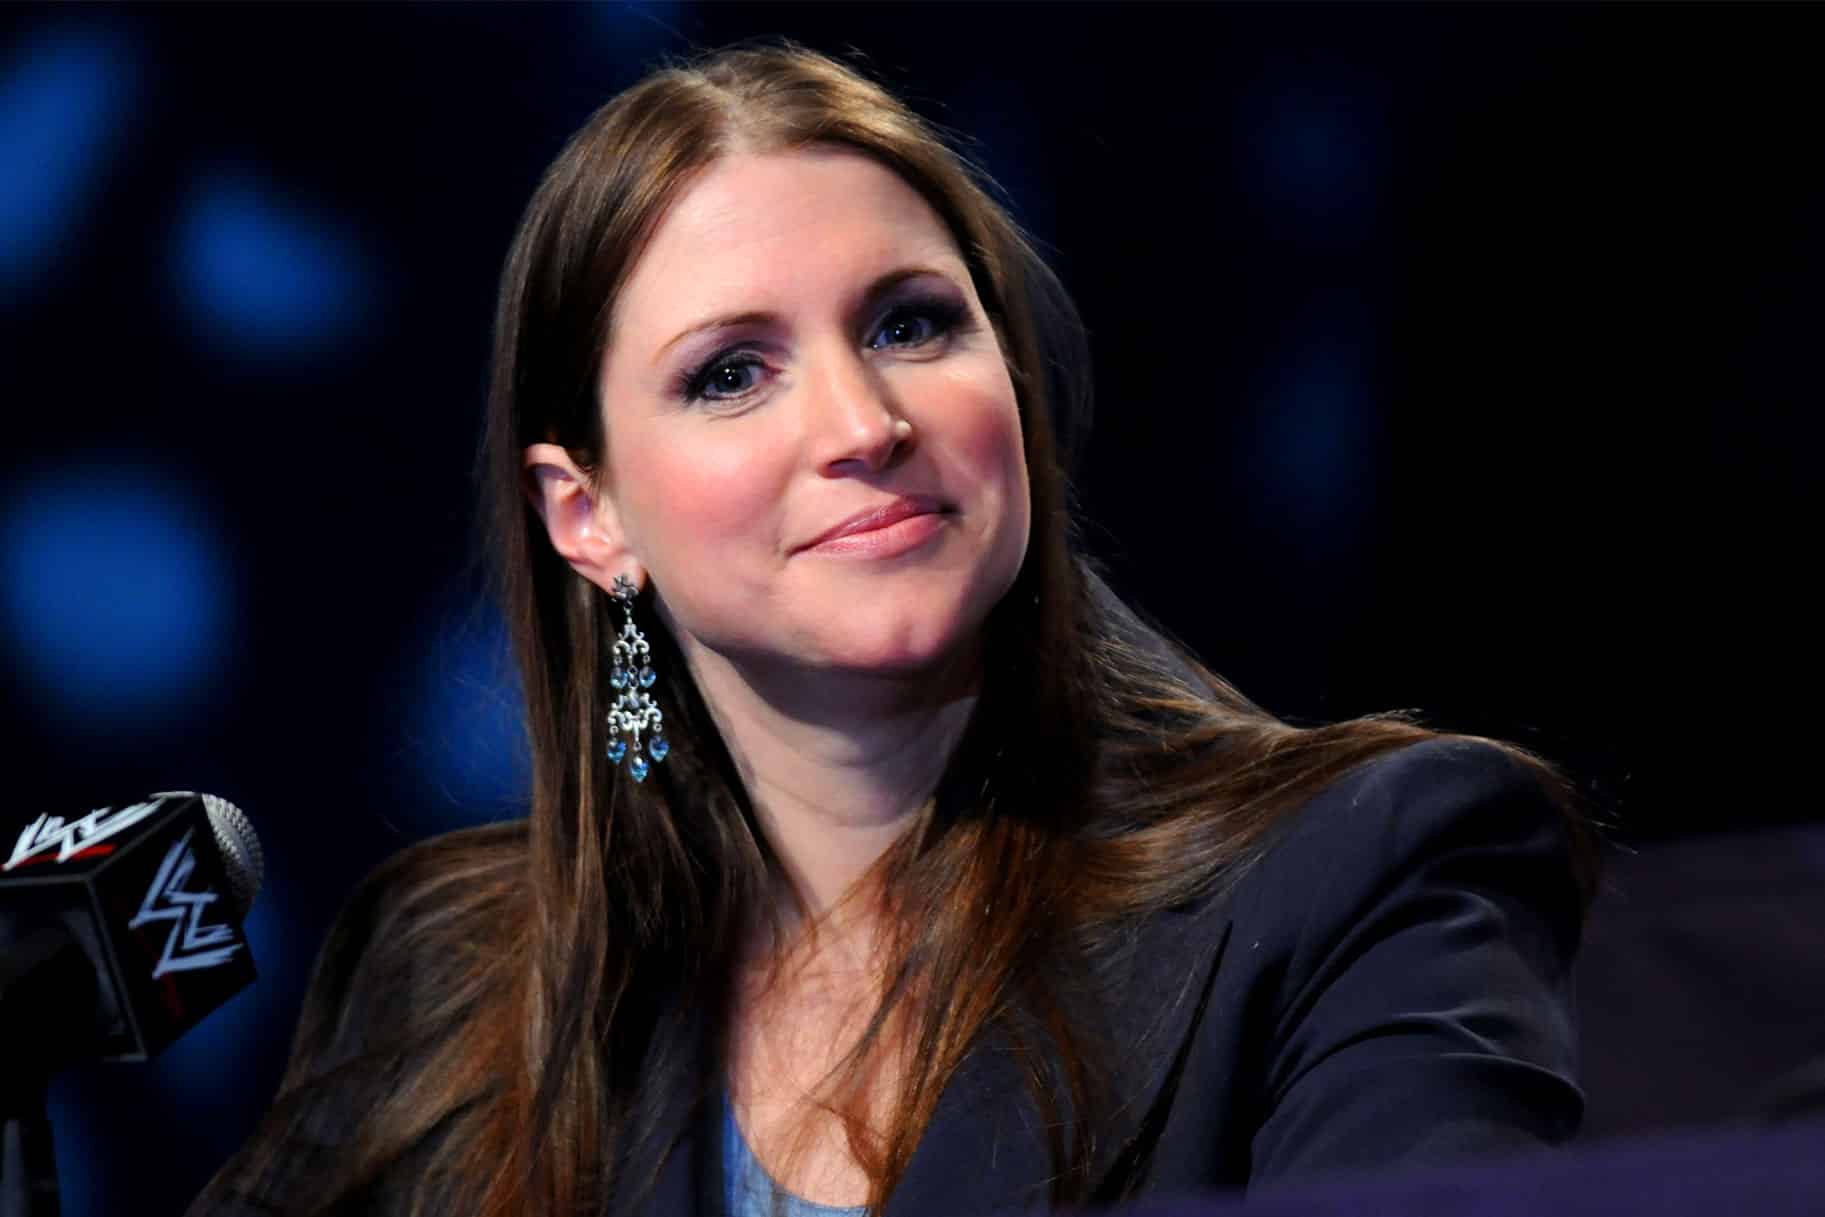 Mideon proposed a romantic outing to Stephanie McMahon, who declined due to her father’s disapproval.